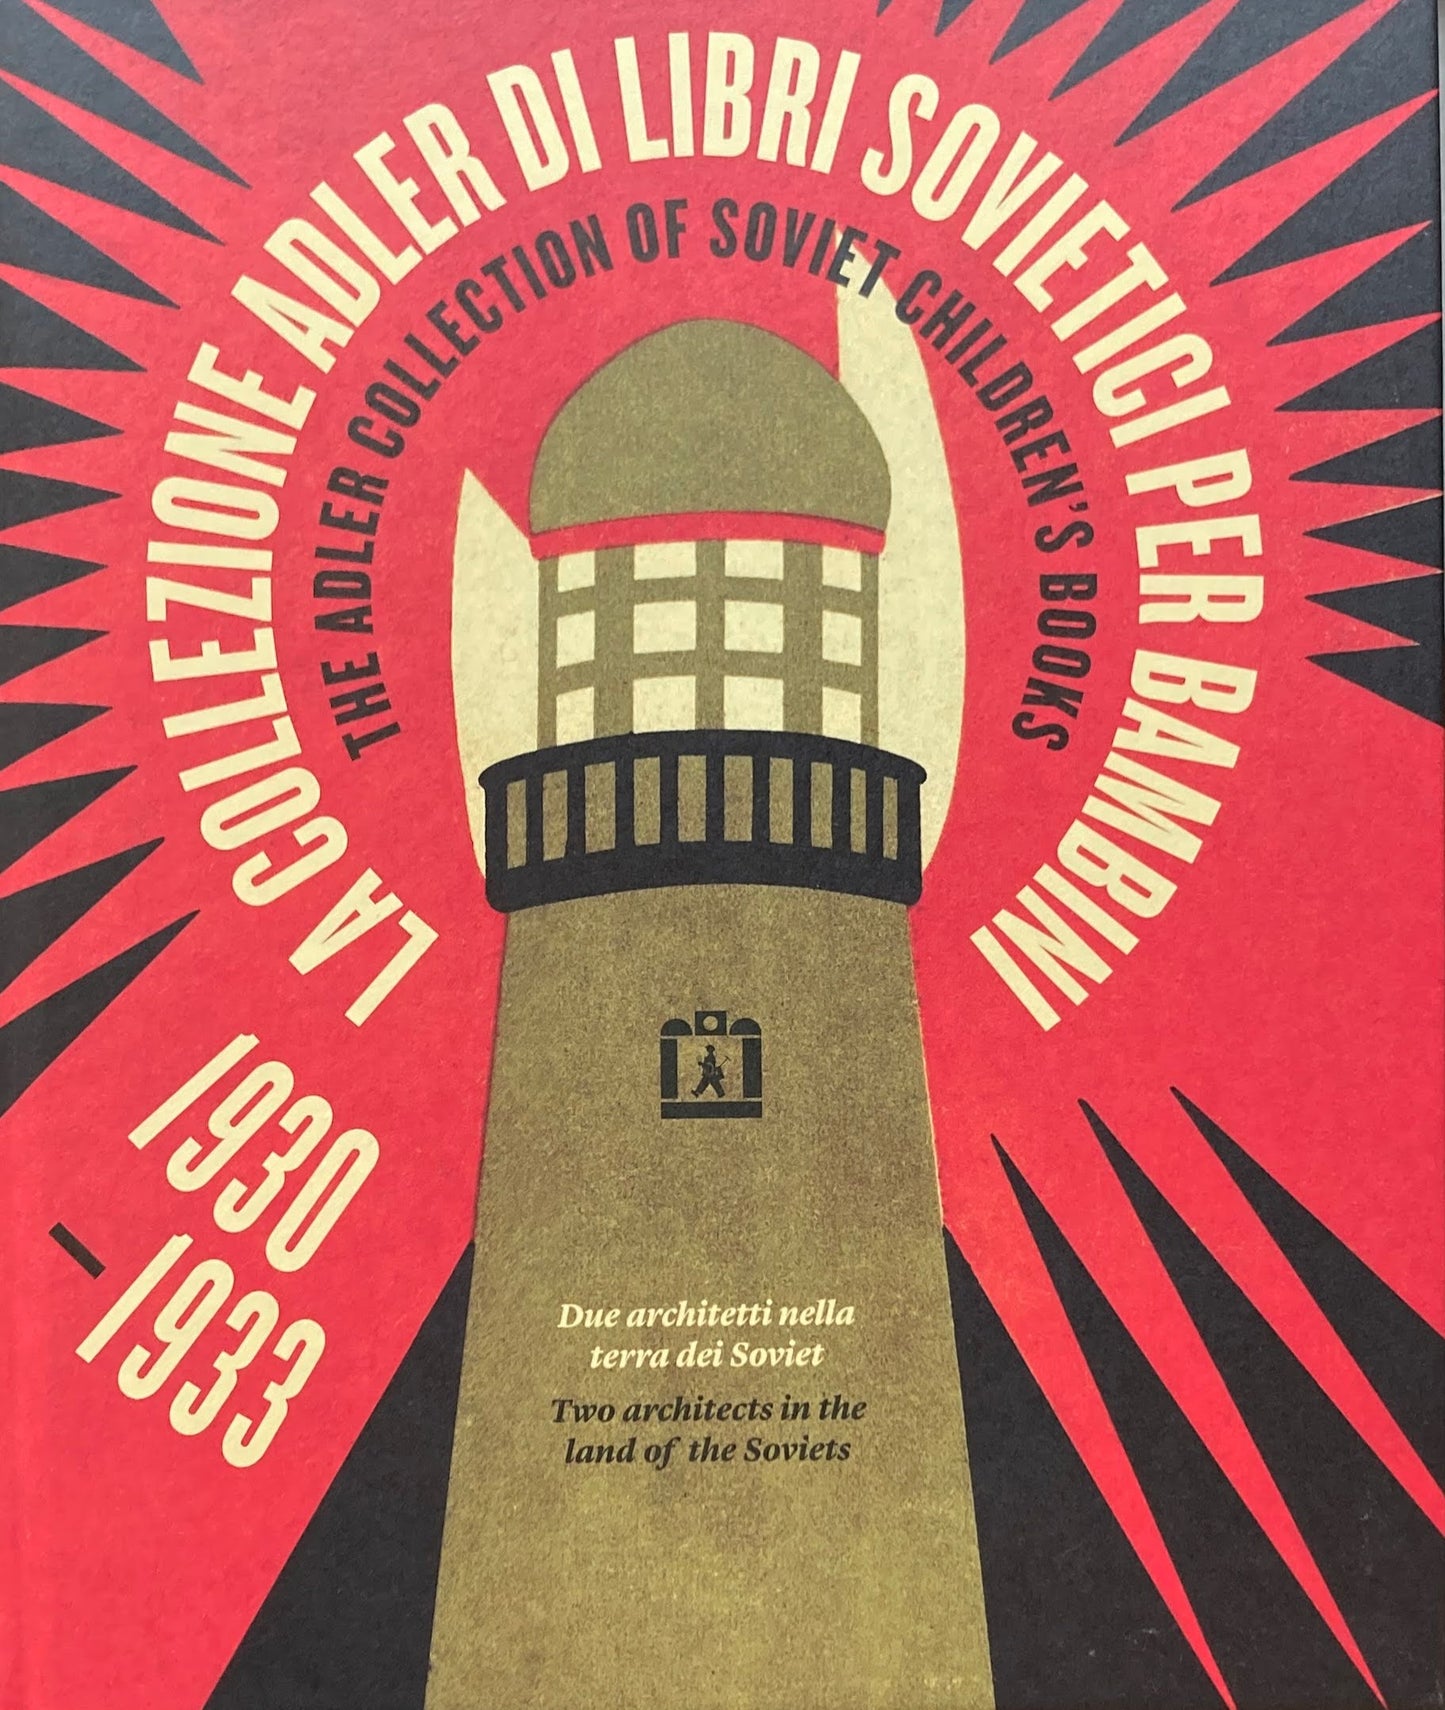 The Adler Collection of Soviet Children's Books 1930-1933 Two Architects in the Land of the Soviets